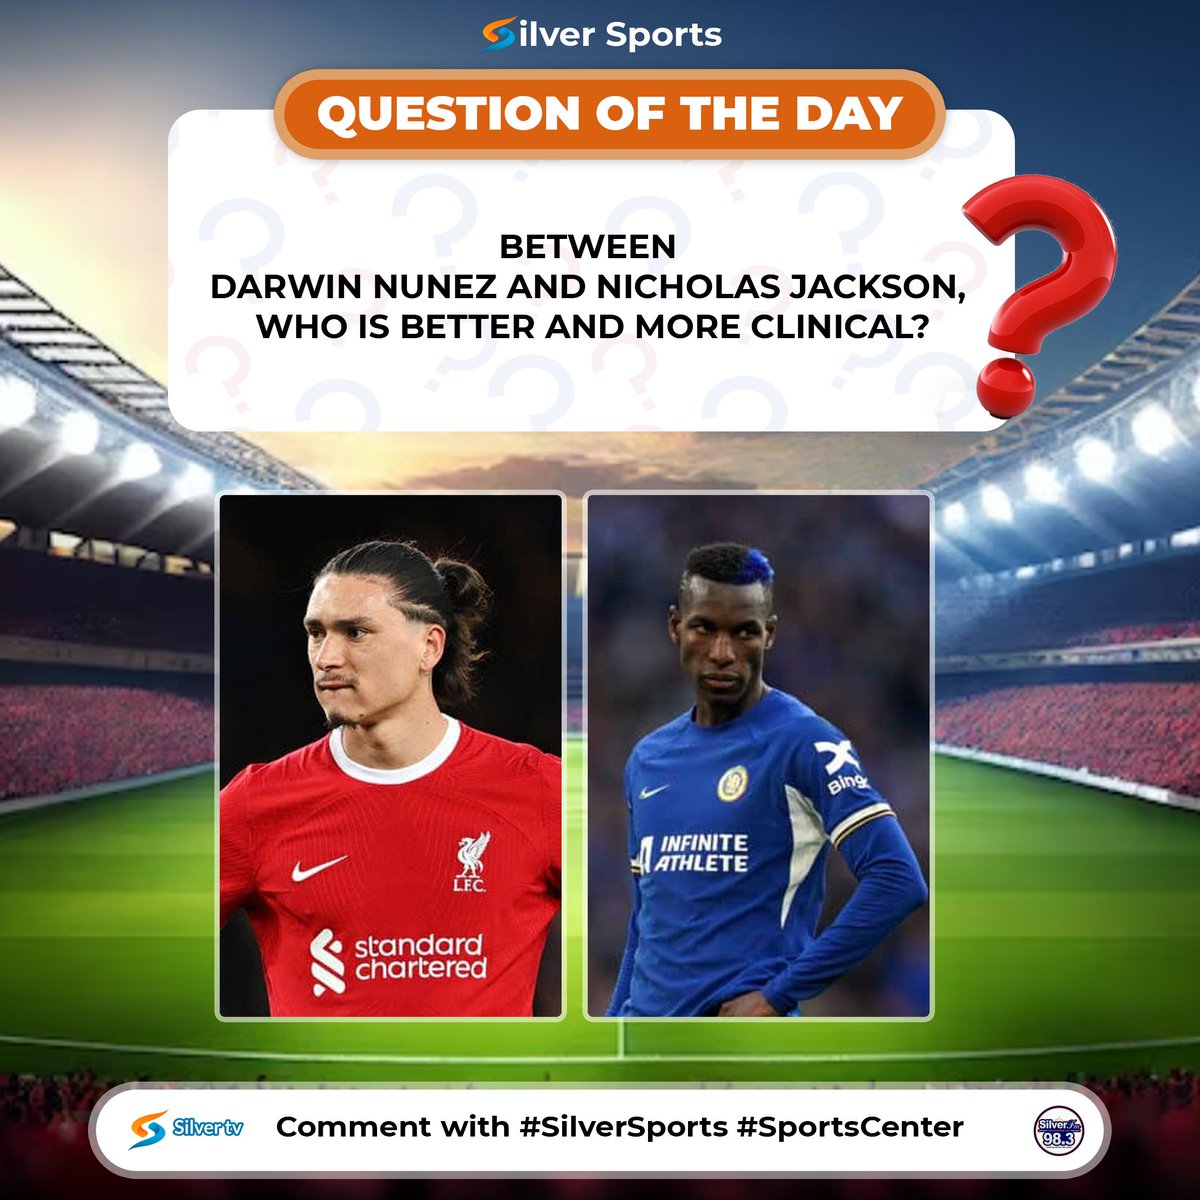 QUESTION OF THE DAY!!! BETWEEN DARWIN NUNEZ AND NICHOLAS JACKSON, WHO IS BETTER AND MORE CLINICAL? ANSWER WITH #SportsCenter FOR VALIDATION.